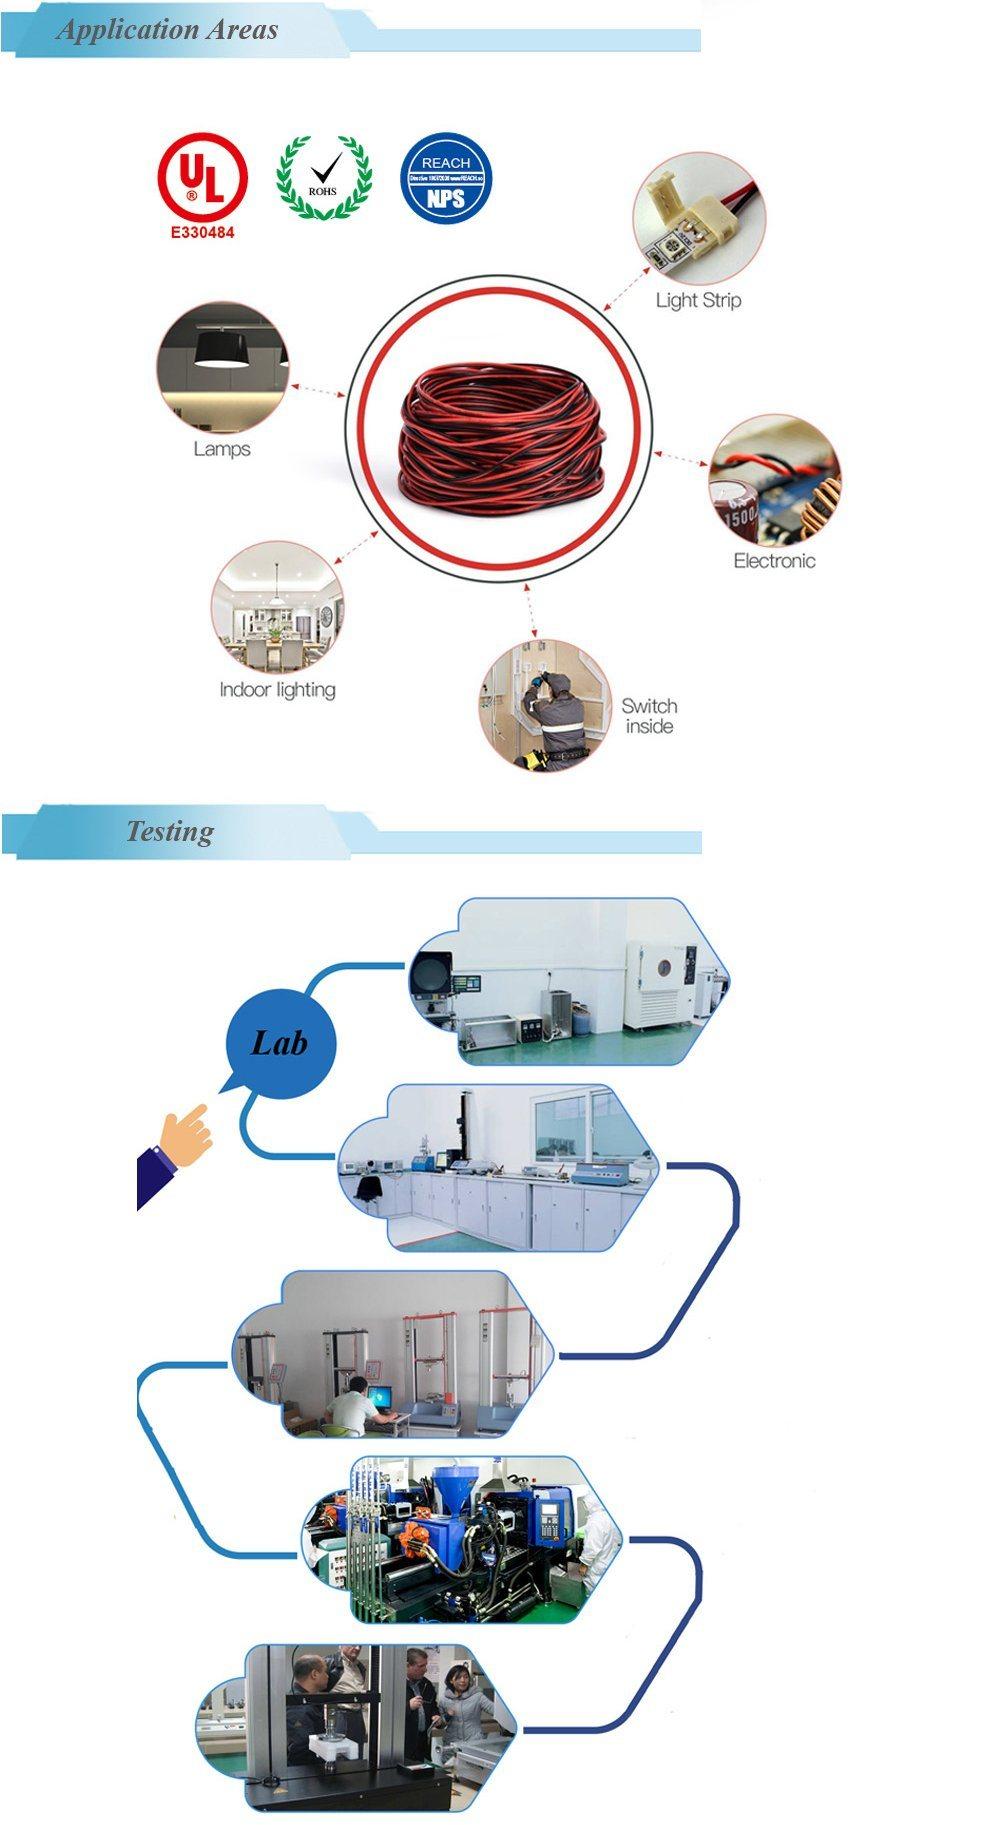 UL2854 PVC Jacketed Flexible Multicores Copper Conductor Wire Cable